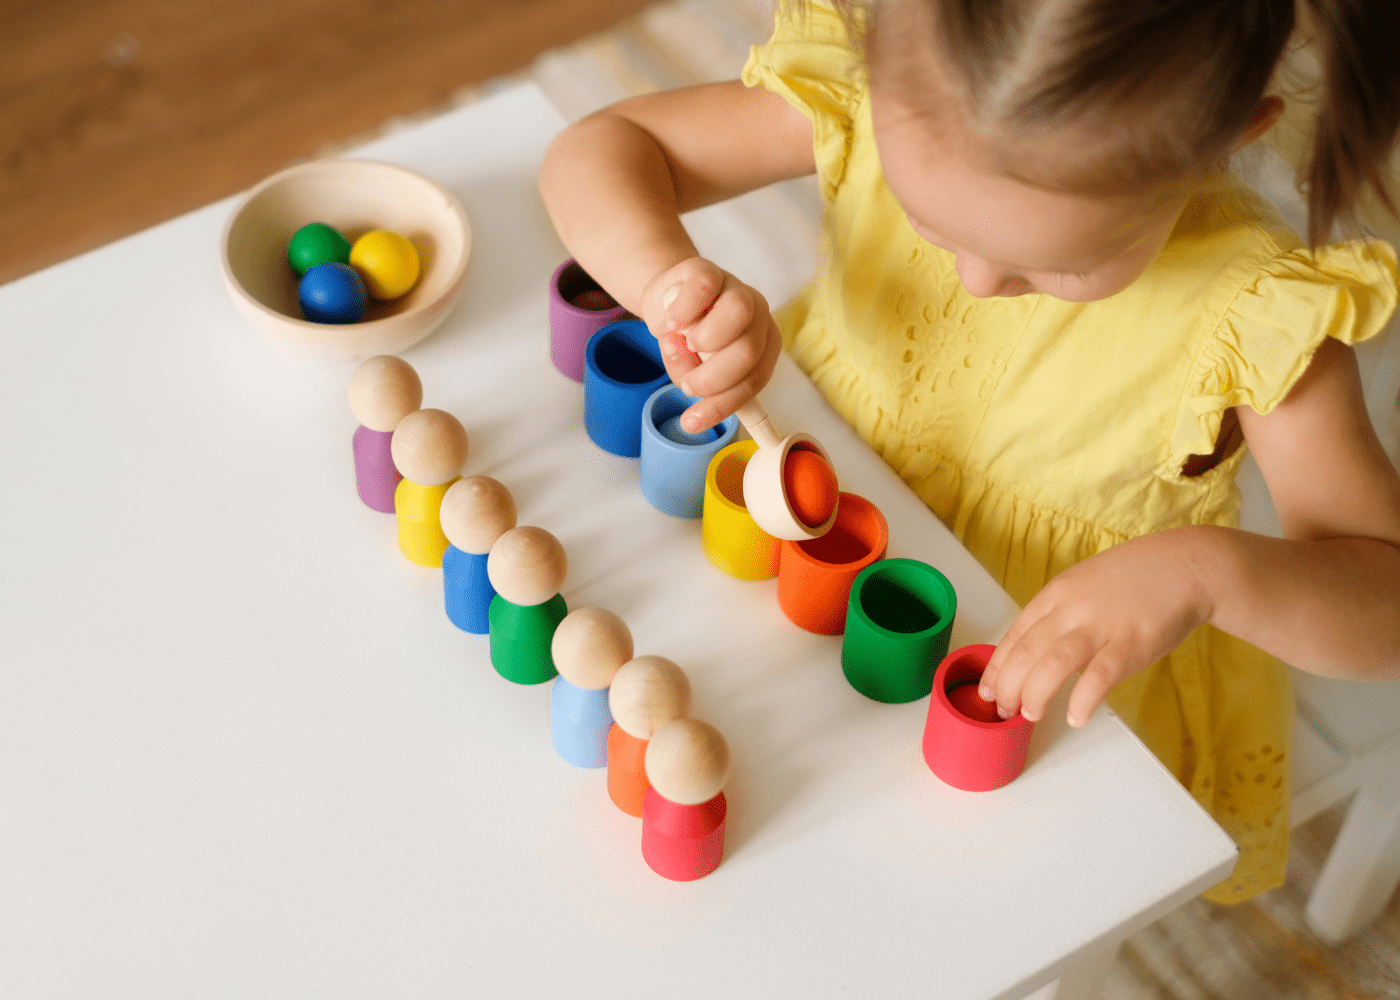 An example of simple preschool sorting activities you can do at home with a child sorting colored balls into matching colored cups.